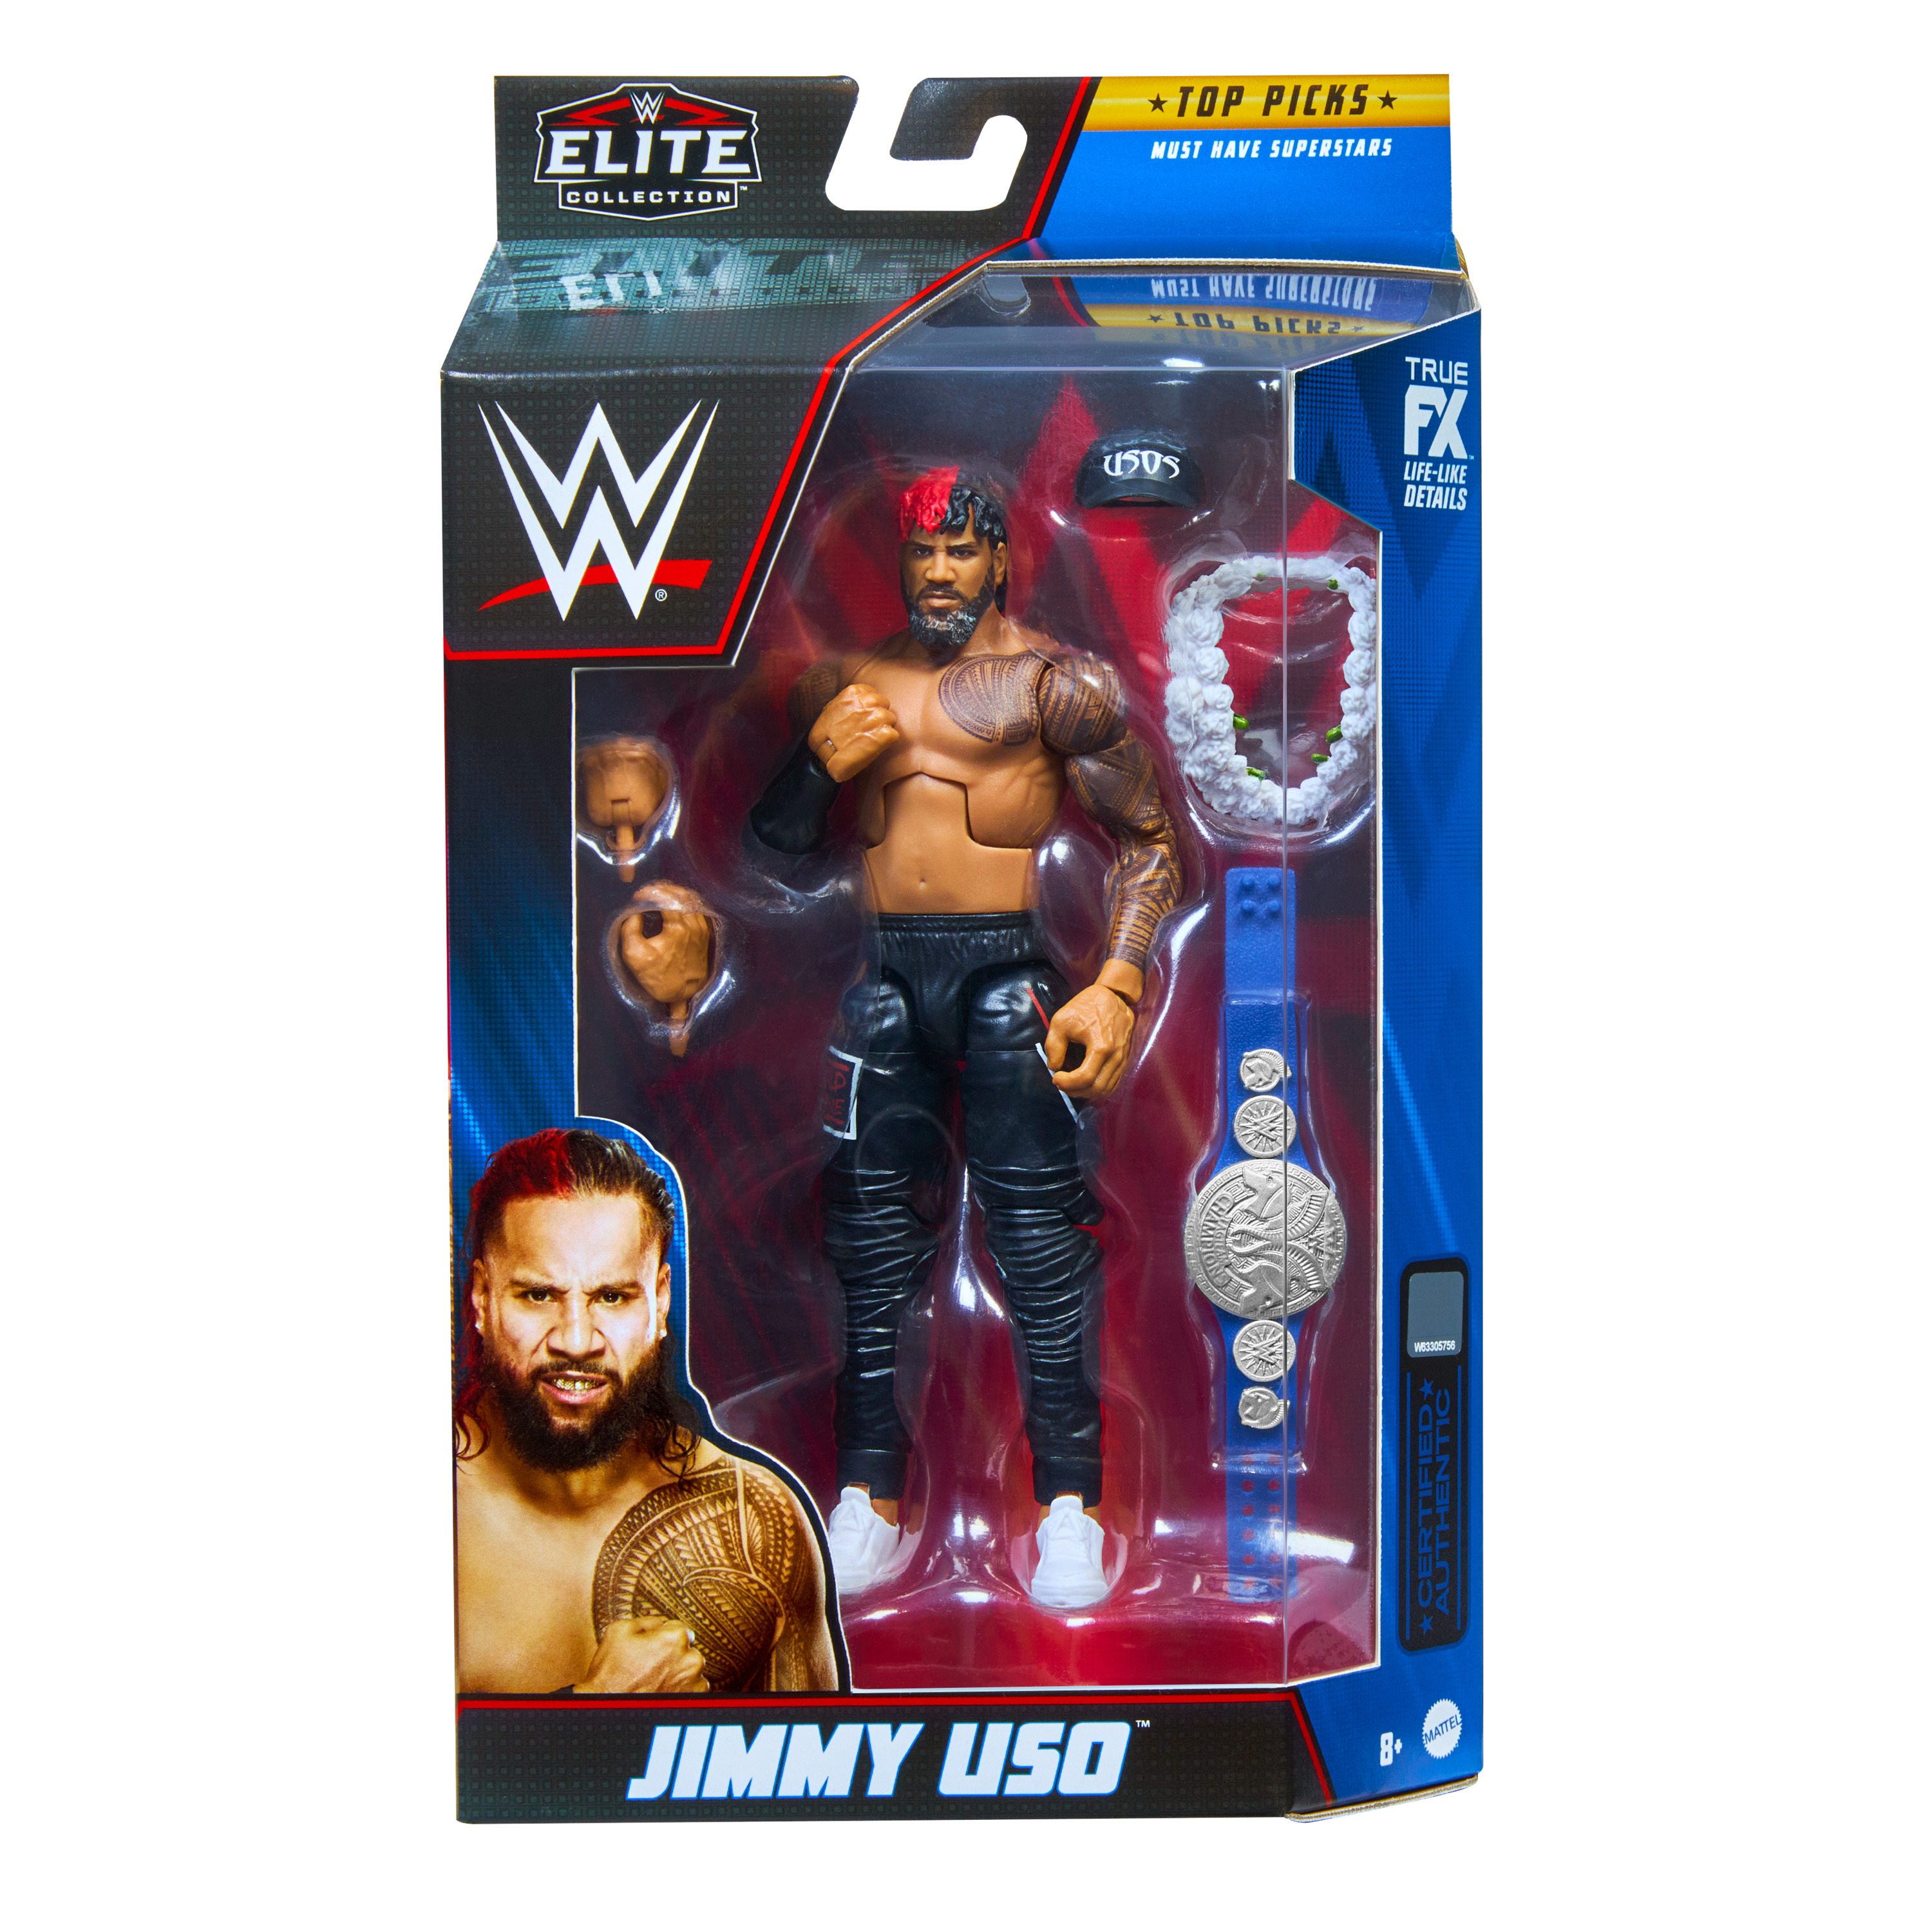 WWE Top Picks Elite Collection Jimmy Uso Action Figure & Accessories, Posable Collectible (6-in) - image 2 of 6